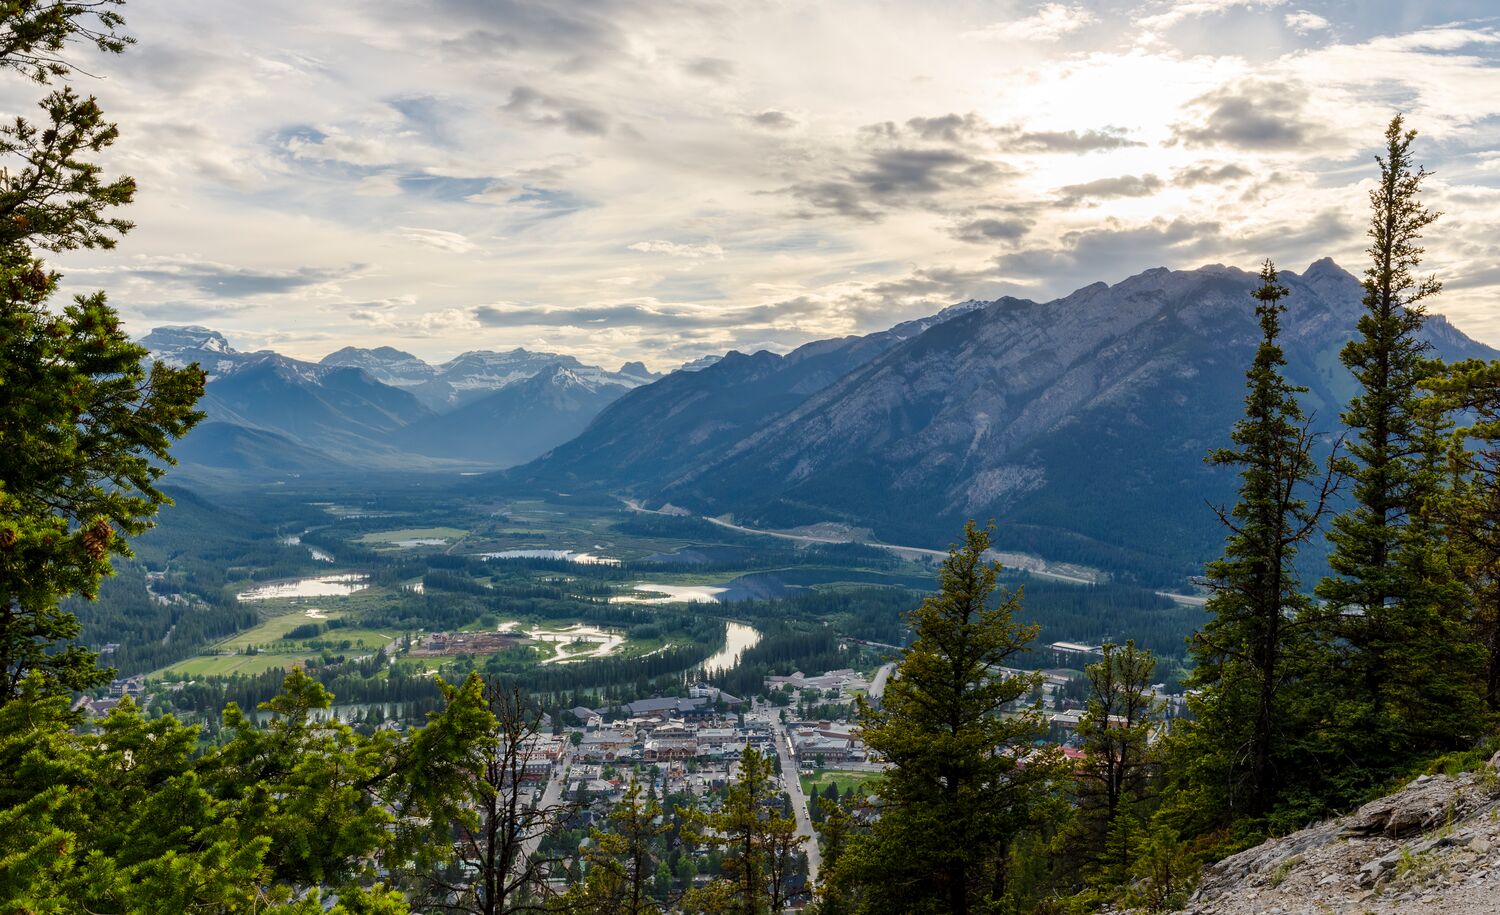 The Banff Townsite as seen from the top of Tunnel Mountain in Banff National Park.